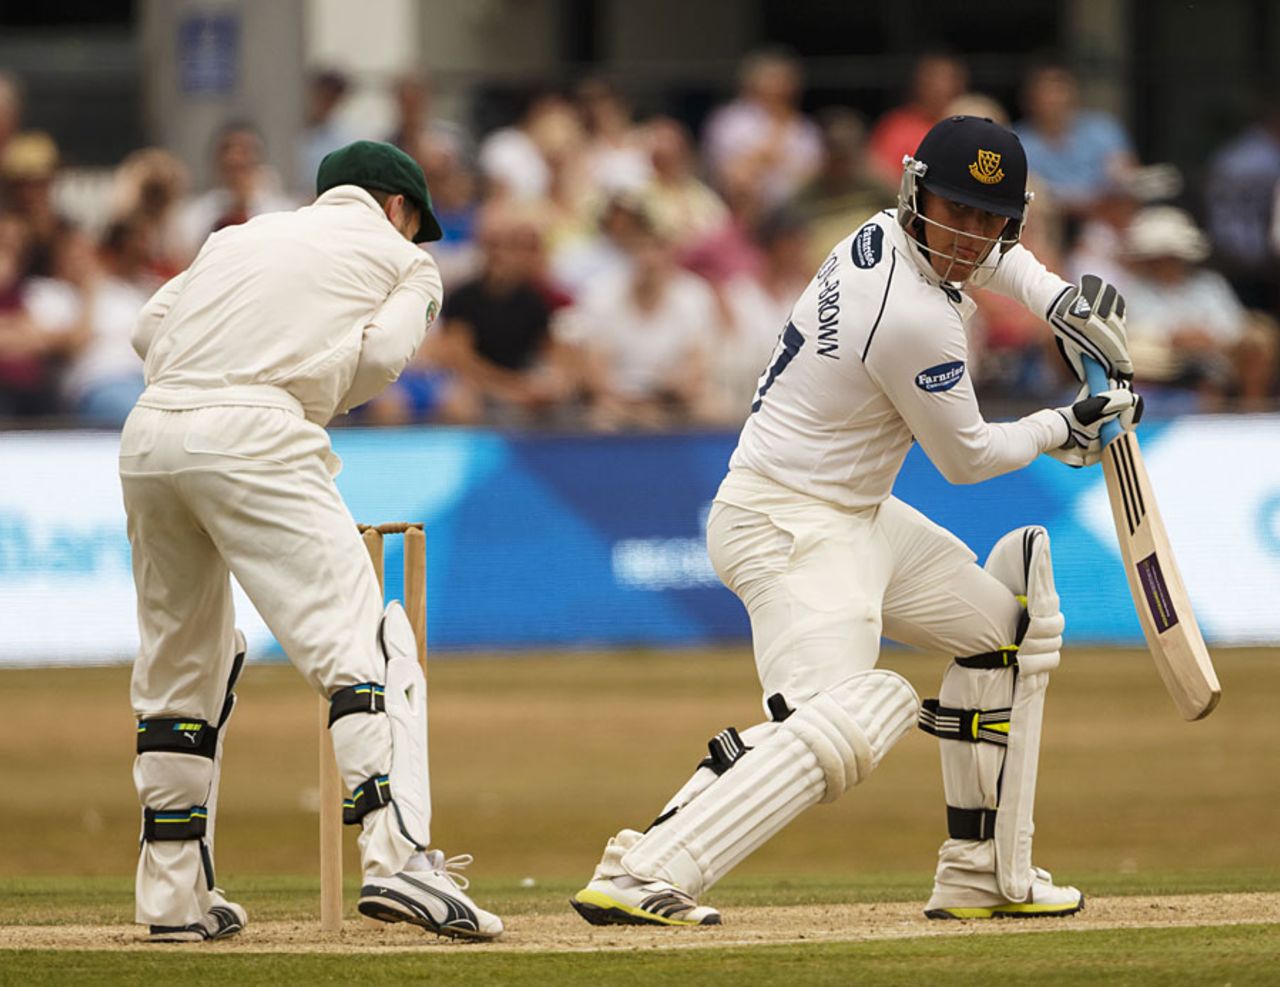 Rory Hamilton-Brown was caught behind for a rapid 73, Sussex v Australians, Tour match, Hove, 2nd day, July 27, 2013